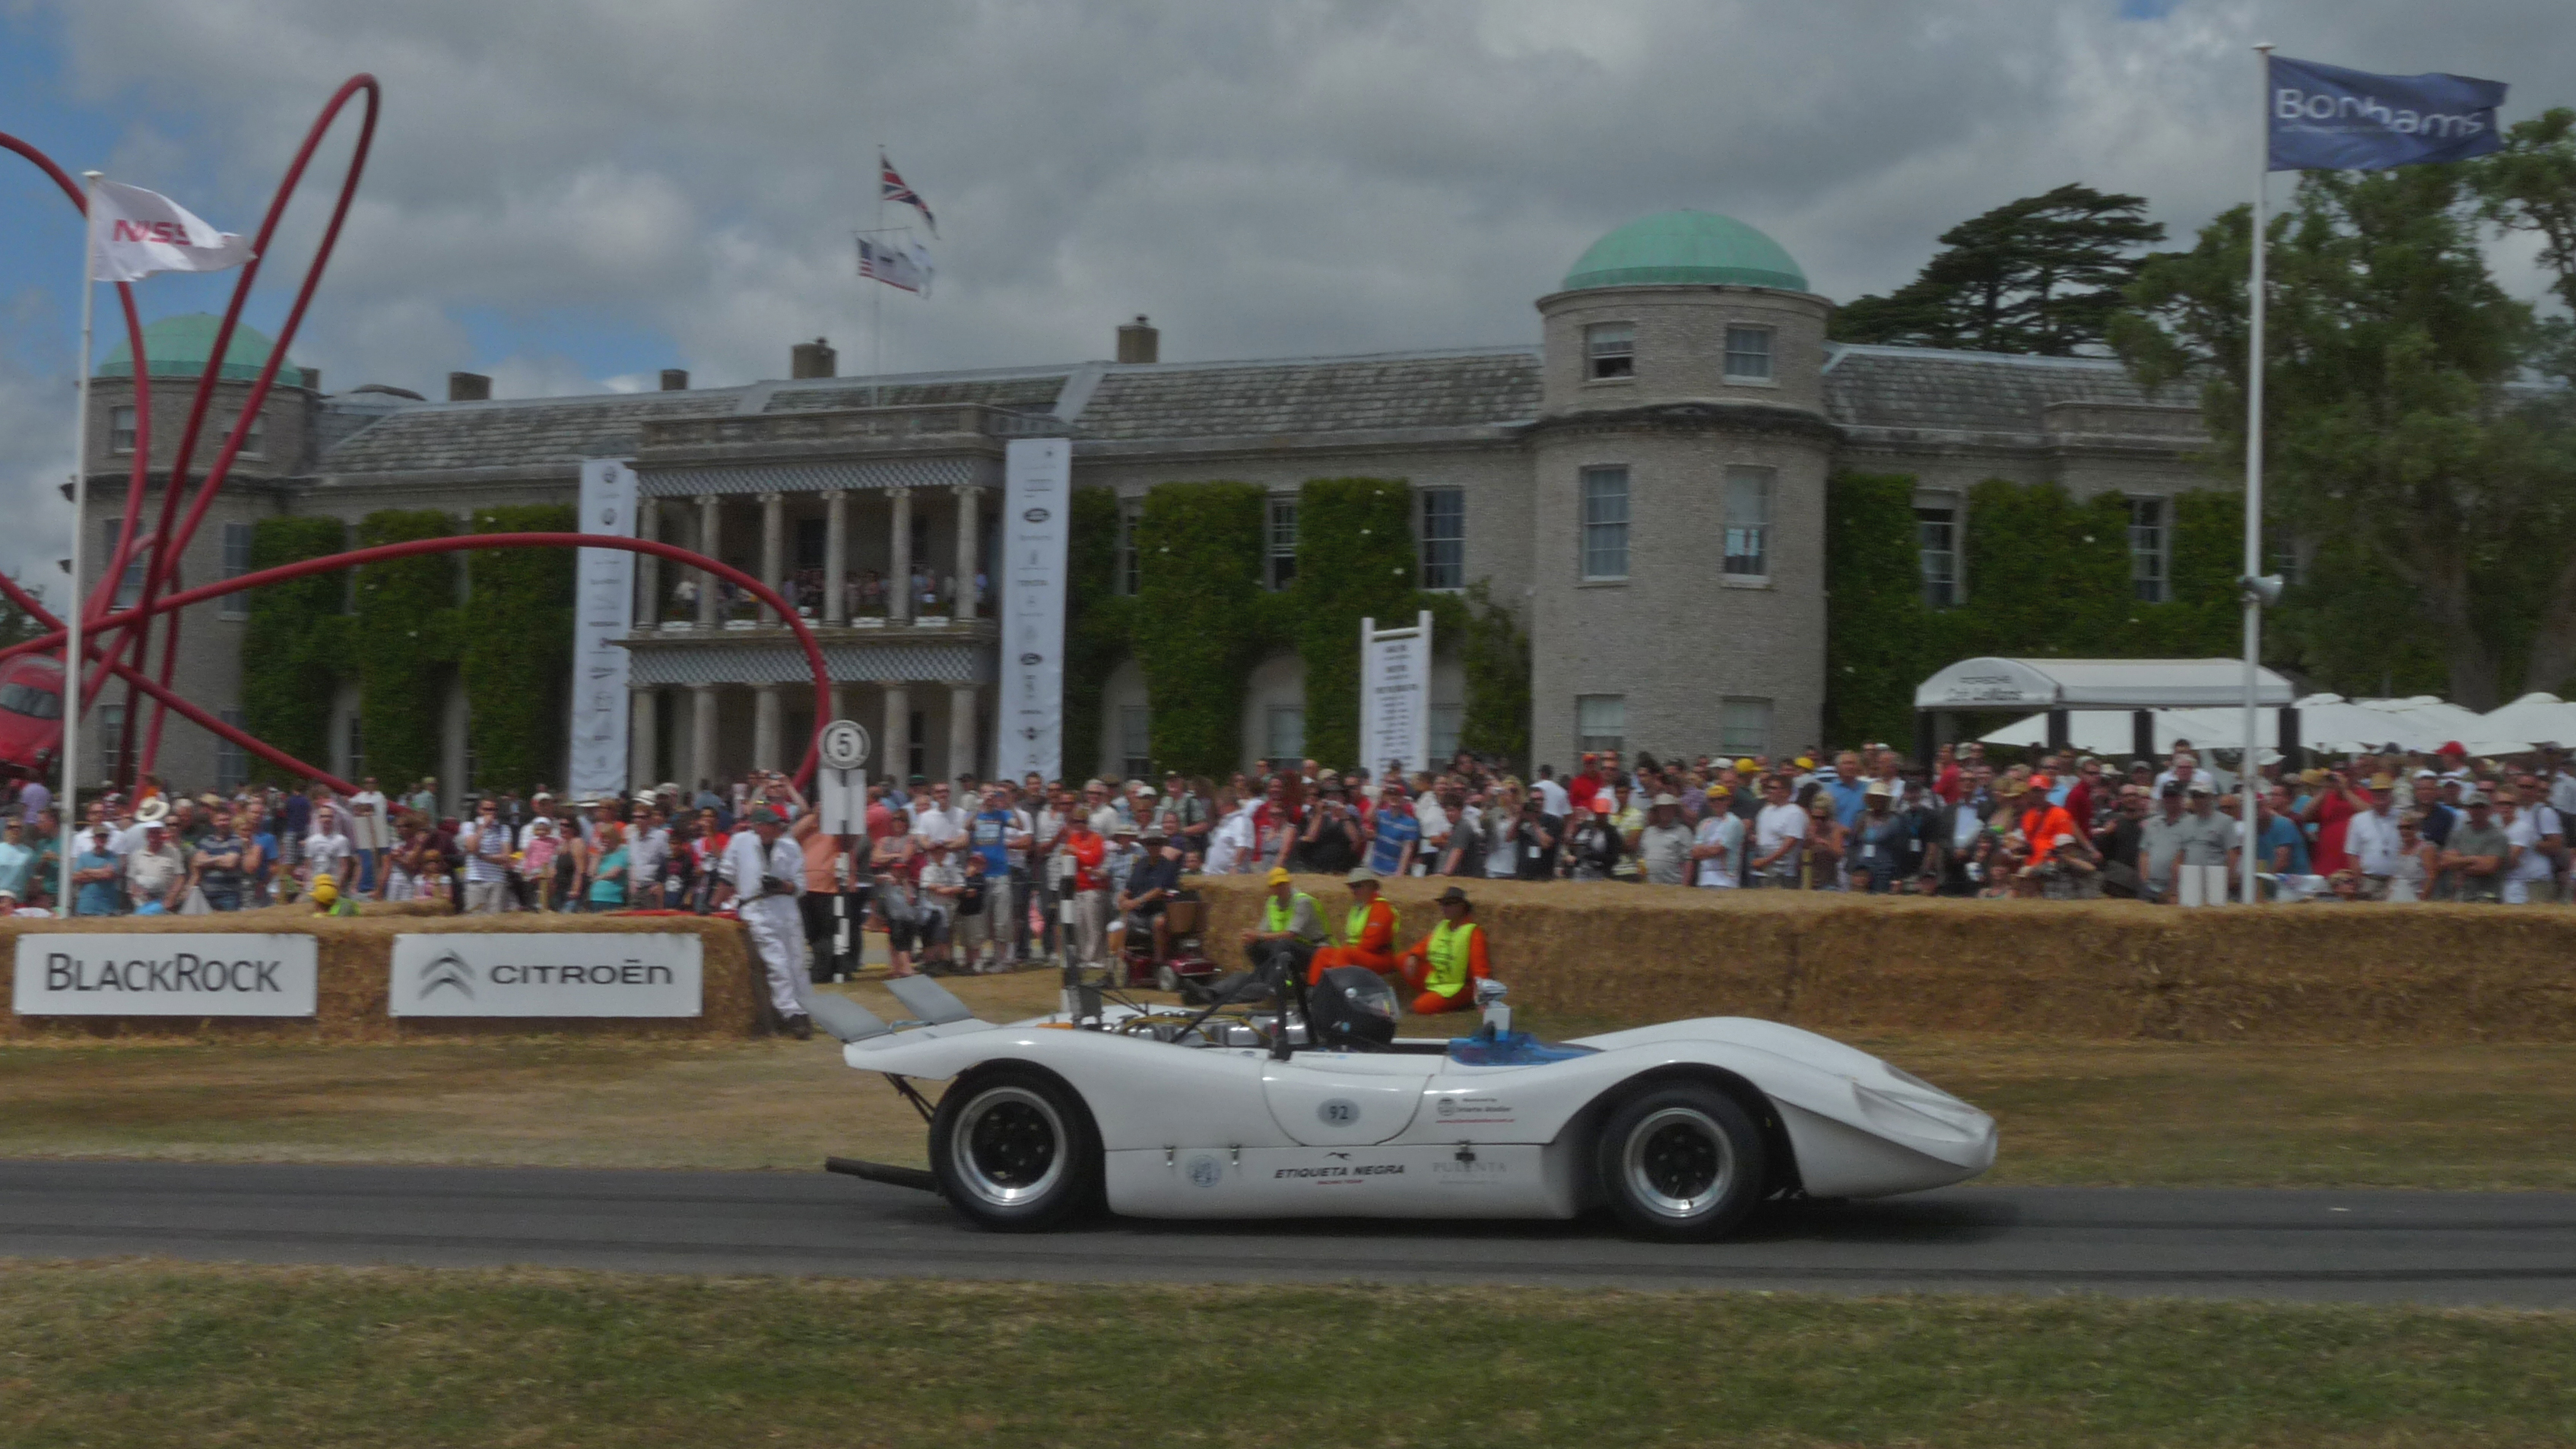 The Berta LR restored at the 2010 Goodwood Festival. It was invited for the 40th anniversary of its debut (Goodwood Festival Press)